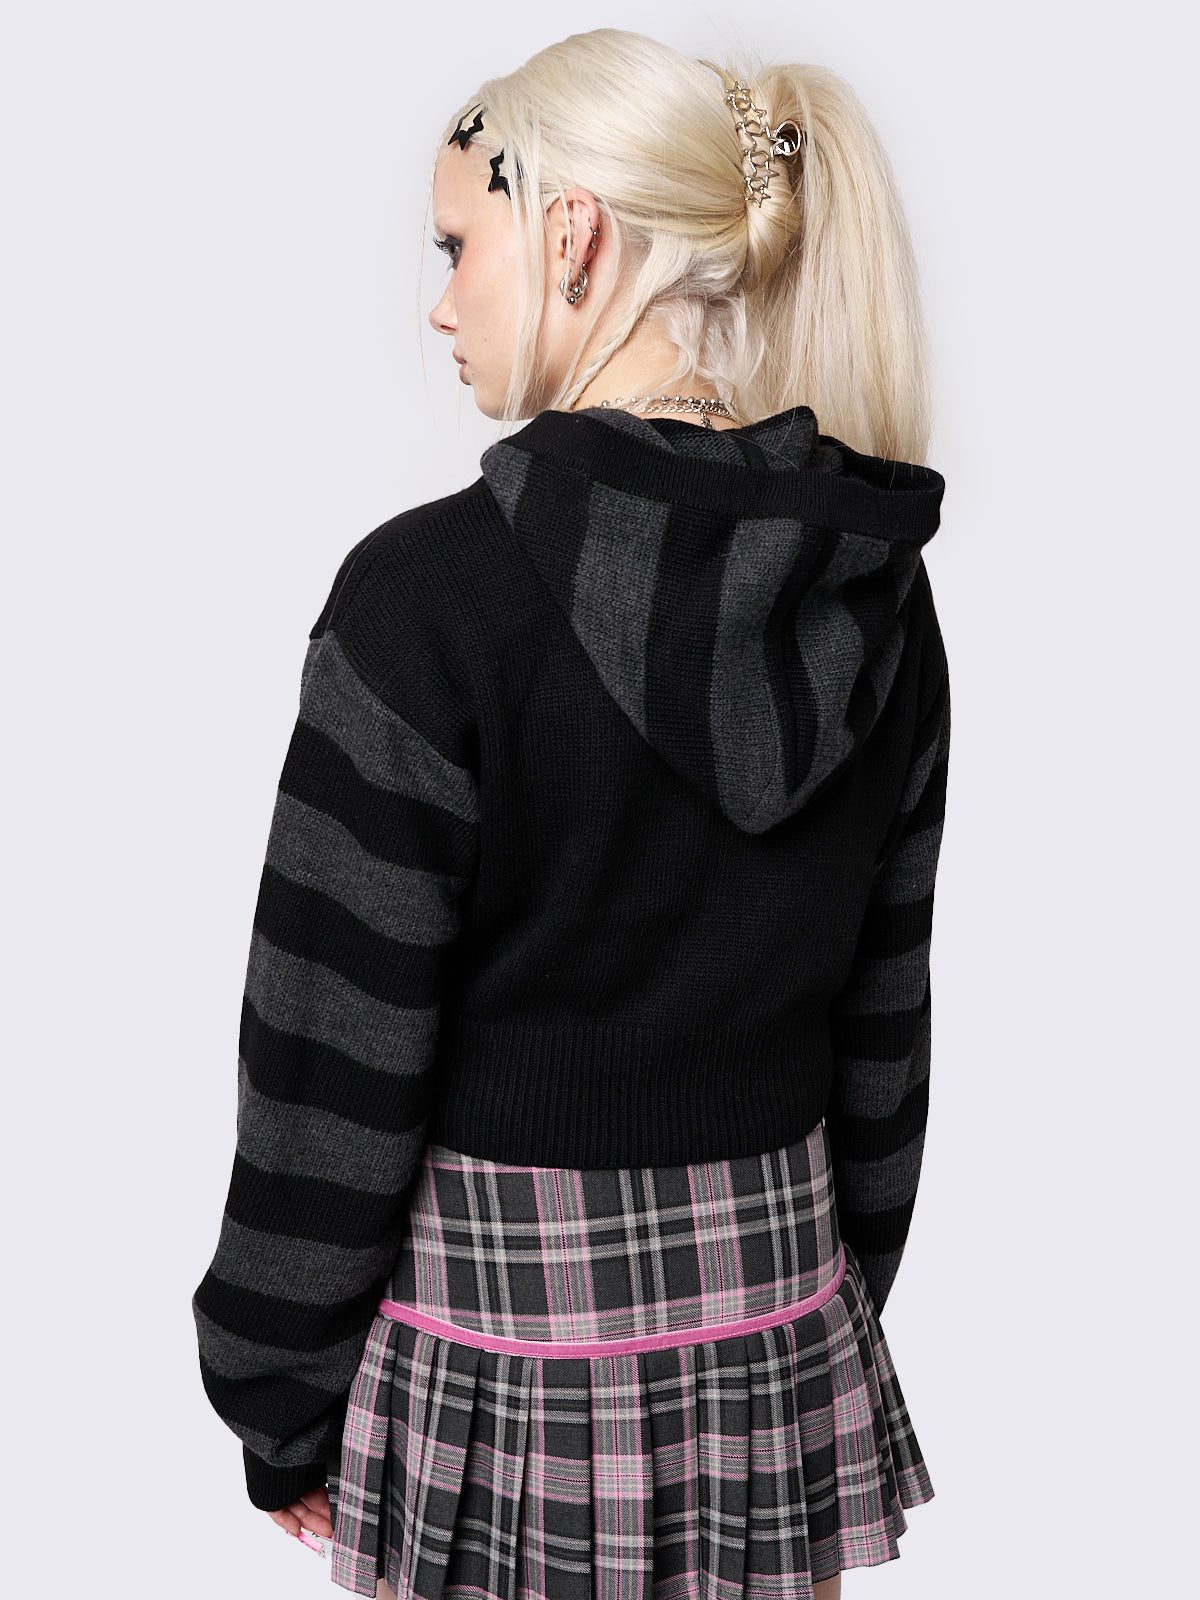 Skull Cropped Zip Up Knitted Hoodie in Black and Grey